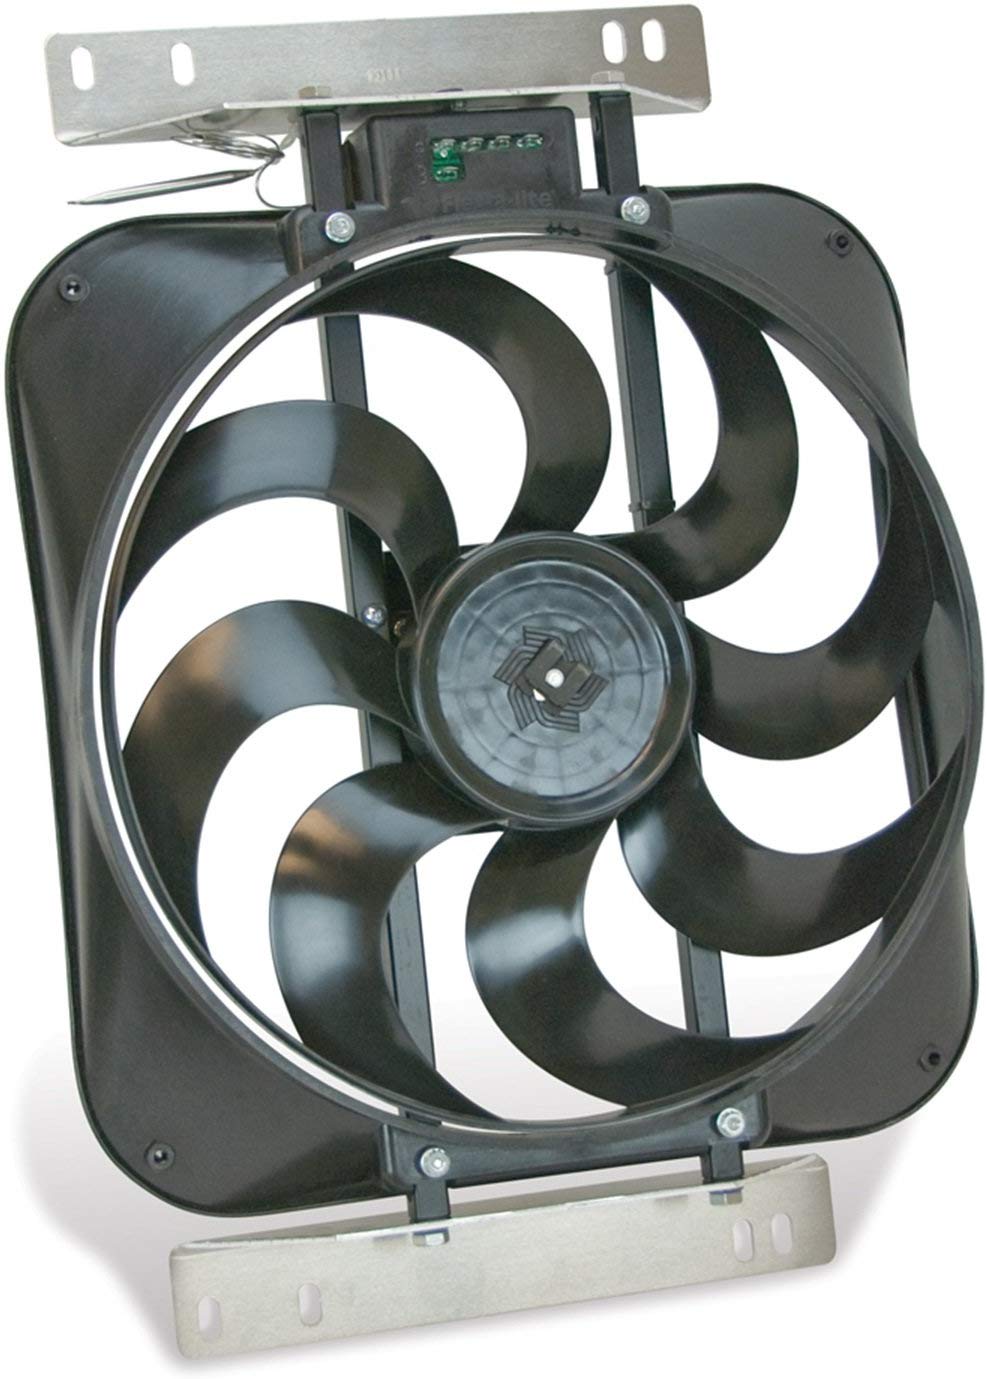 Flex-a-lite 674 S-blade Engine Cooling Fan with Controls